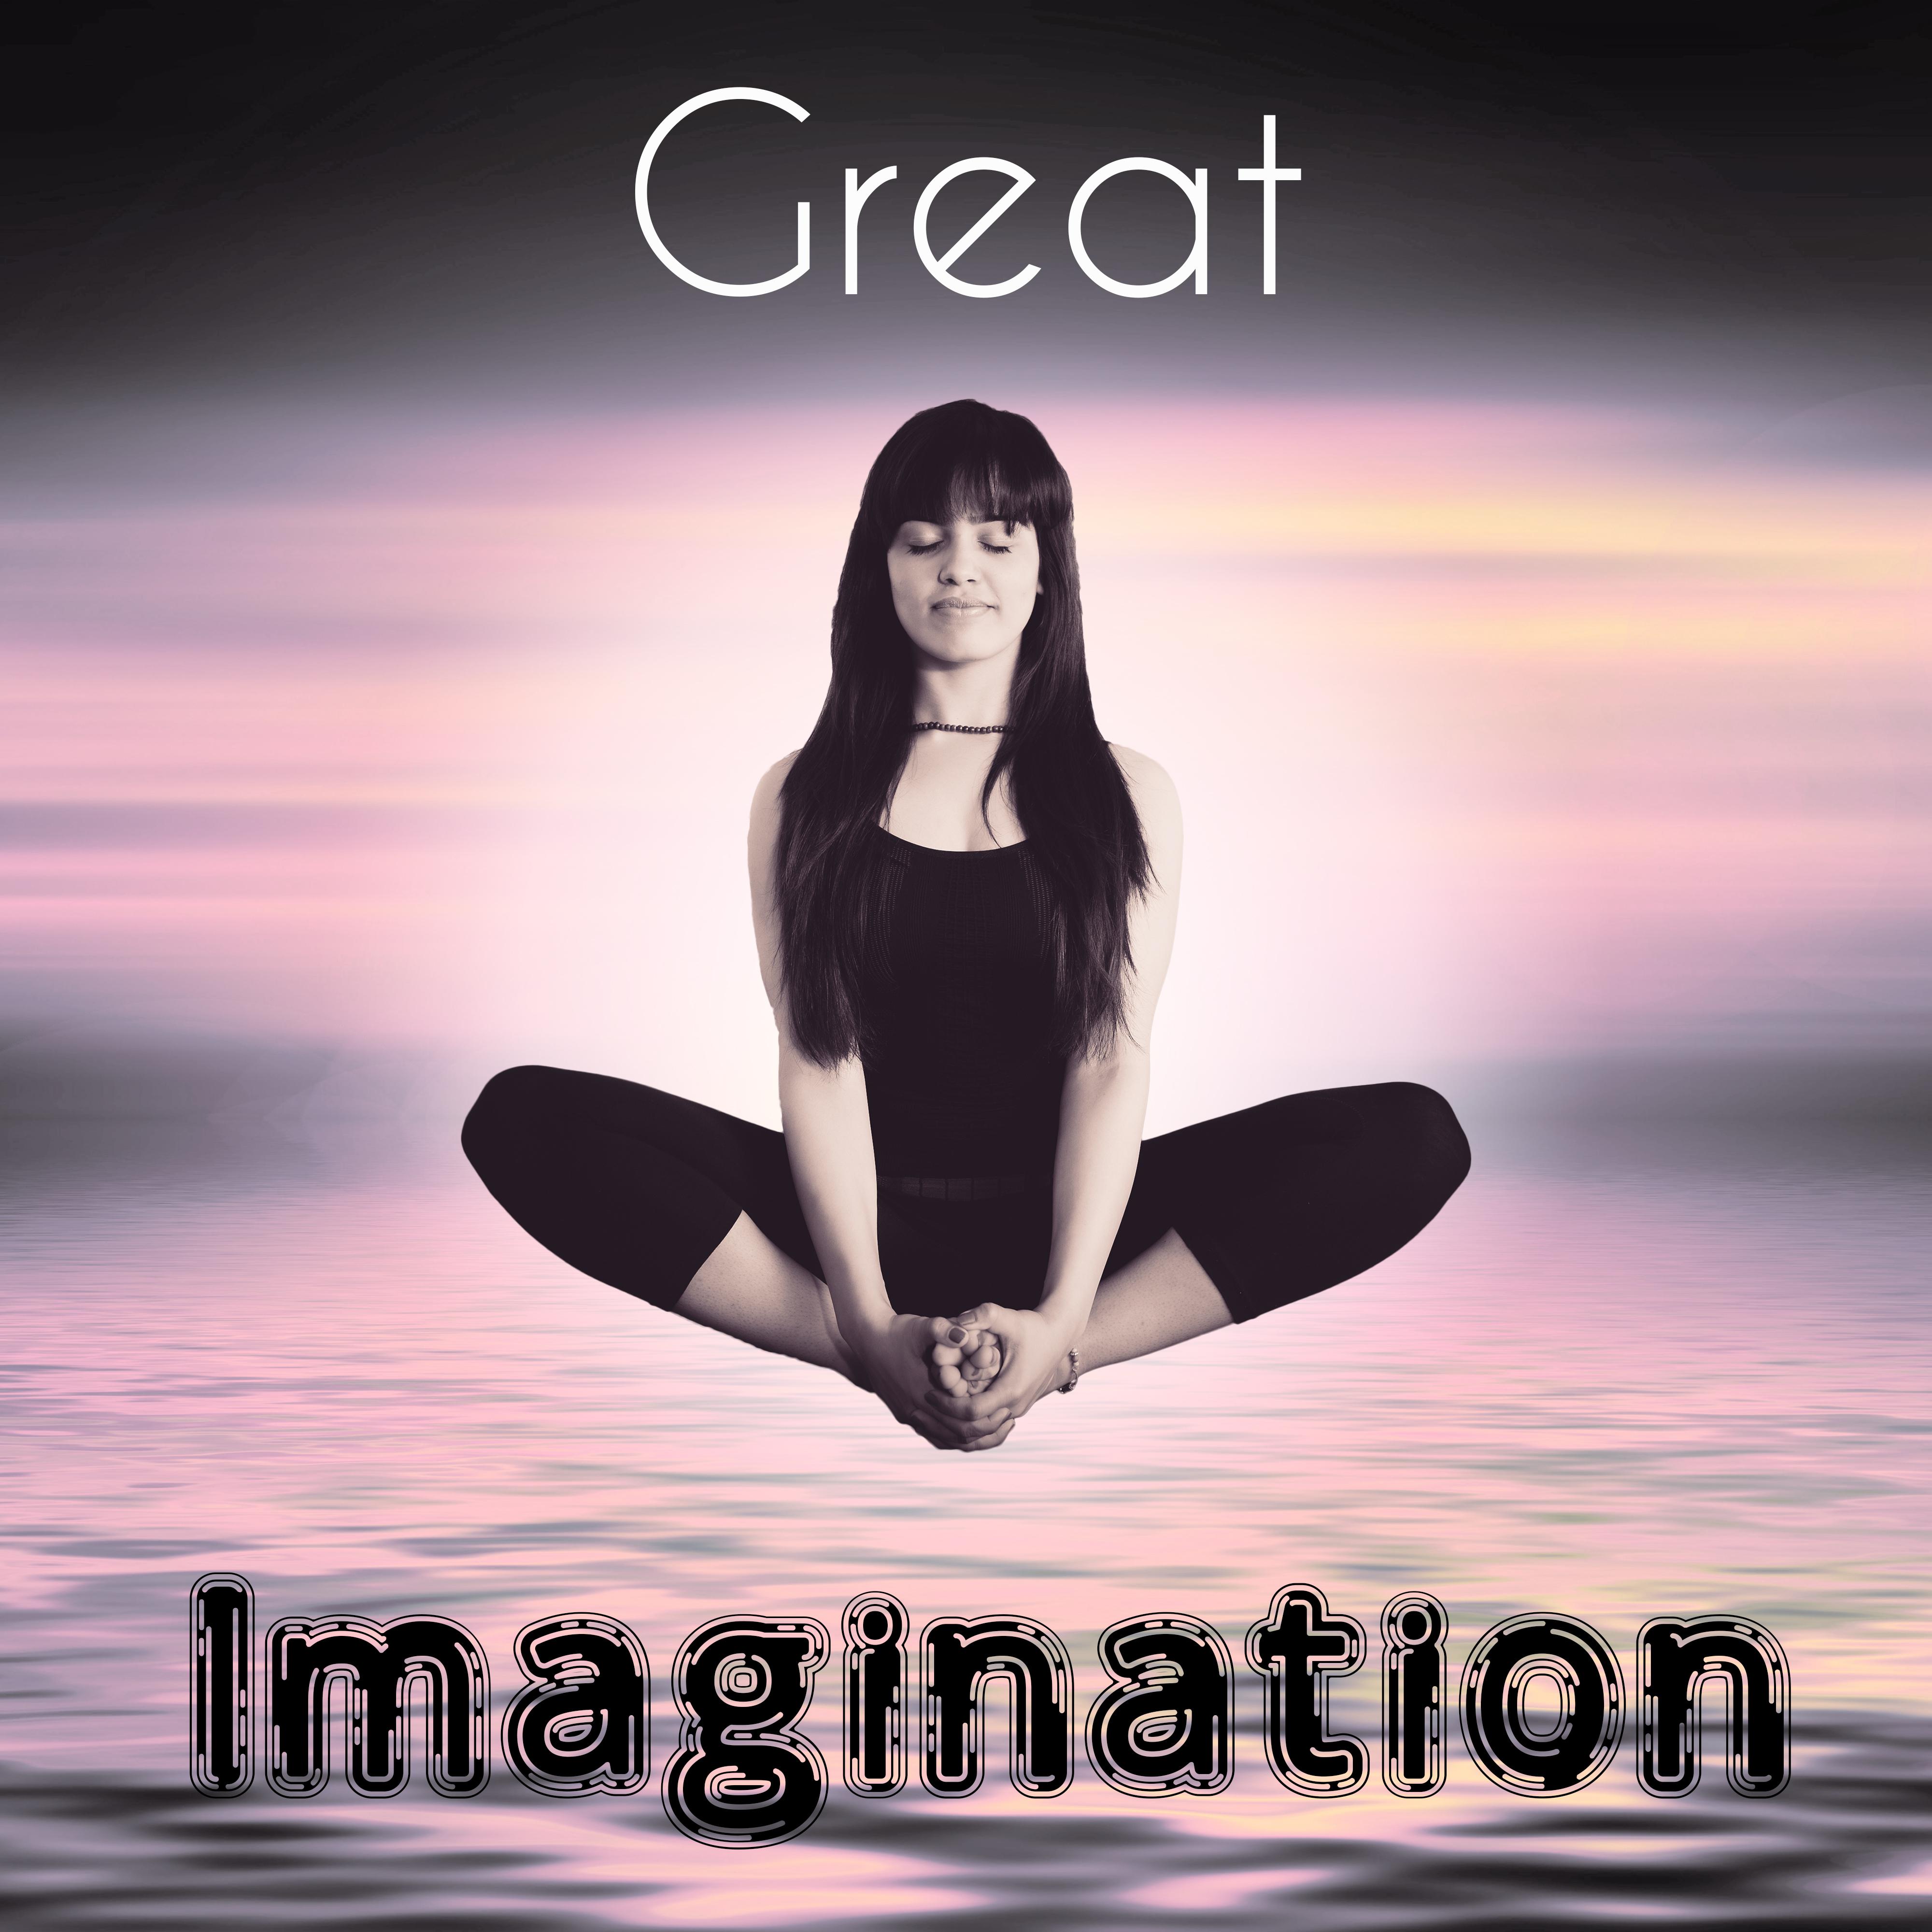 Great Imagination - Power of Dreams, Perfect Yogi, Regeneration Force, Harmony and Balance, Get Up with Sun, Morning Sun Rays, Meditation Stronger than Coffee